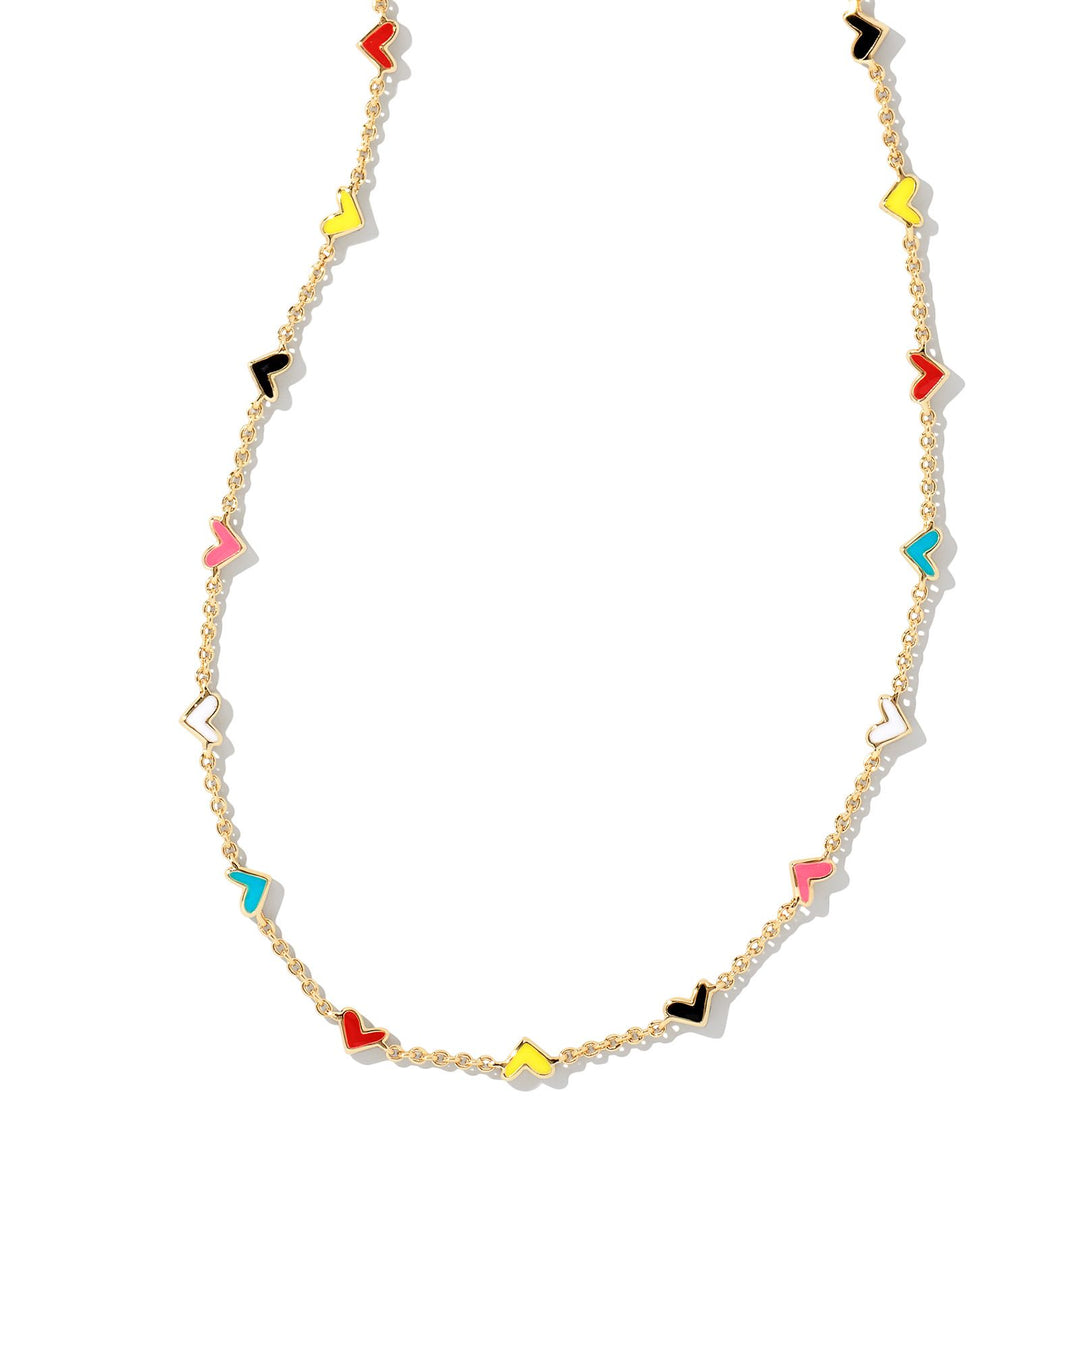 HAVEN STRAND NECKLACE - GOLD MULTI MIX